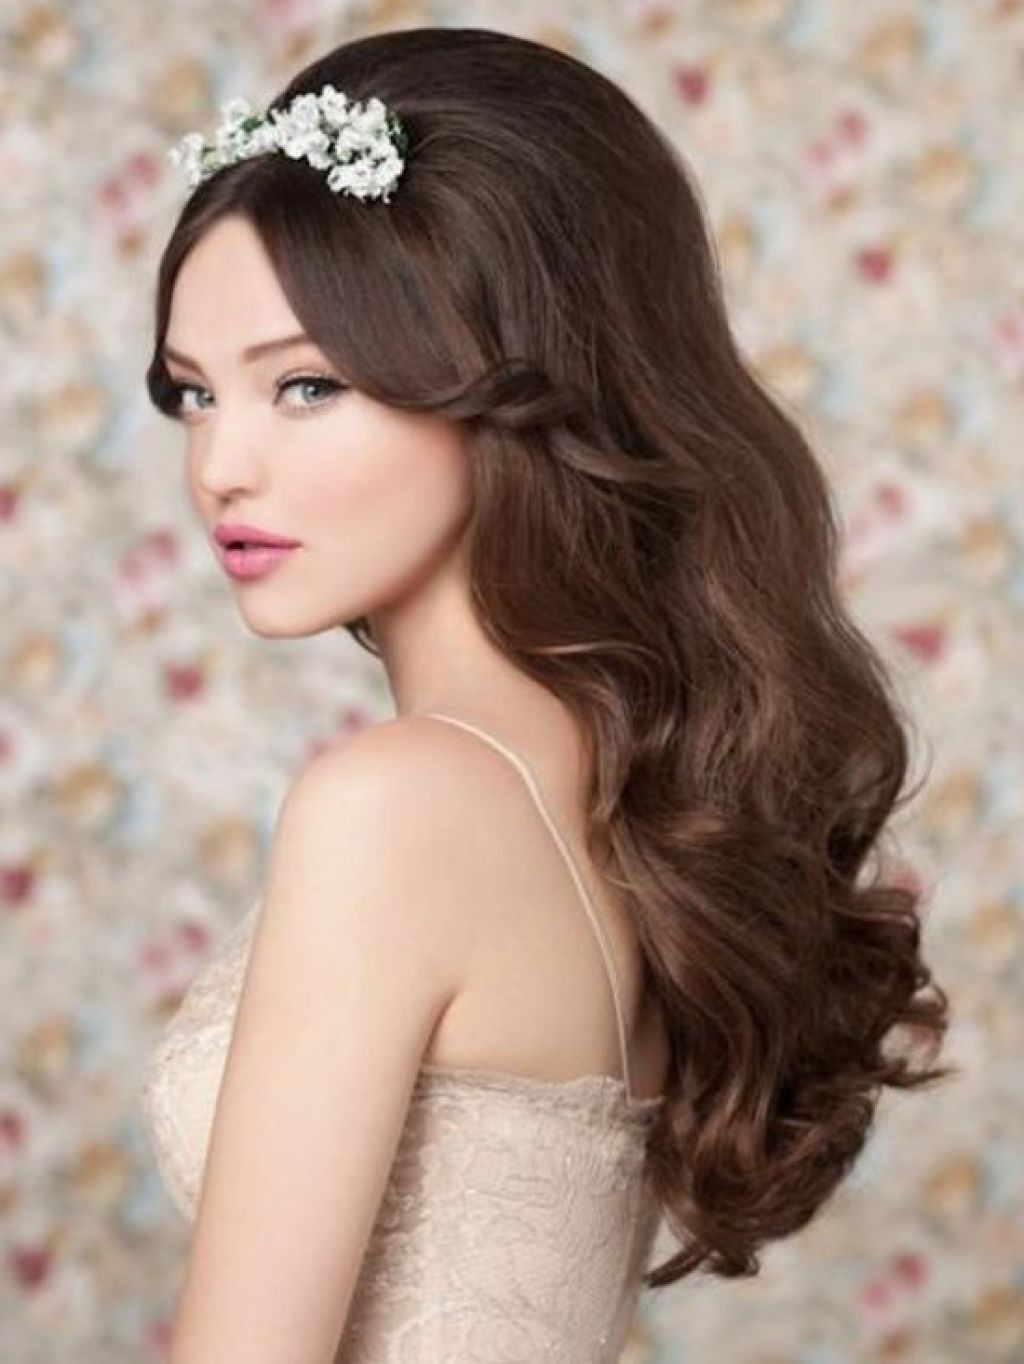 Hairstyles For Long Hair
 20 Classic Wedding Hairstyles Long Hair MagMent